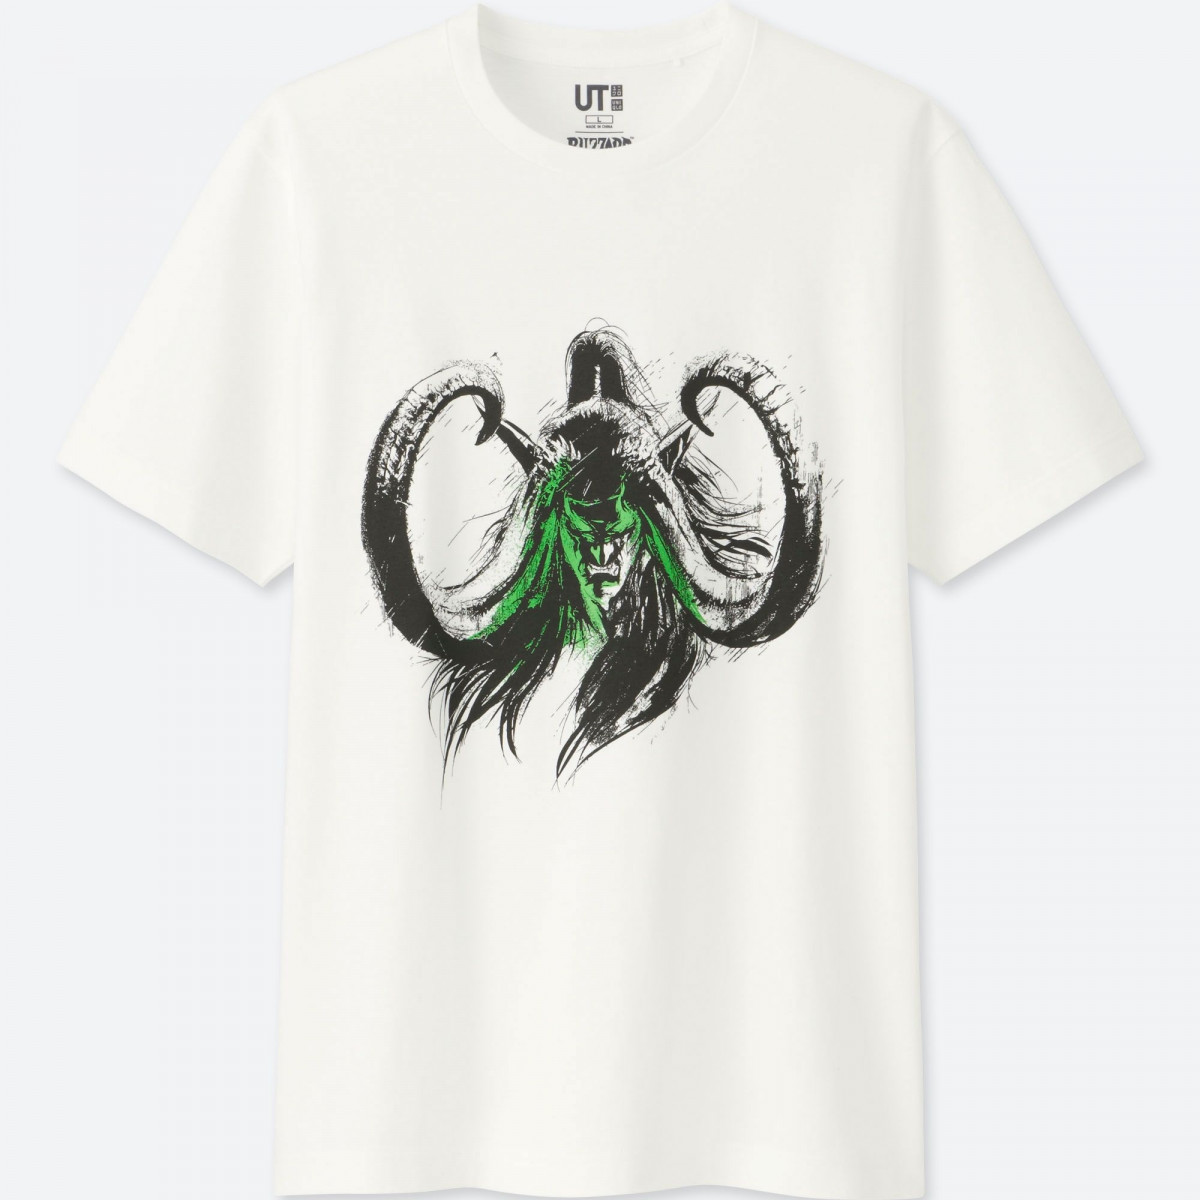 Uniqlo And Blizzard Clothes Collection Releasing On June 11th Wowhead News